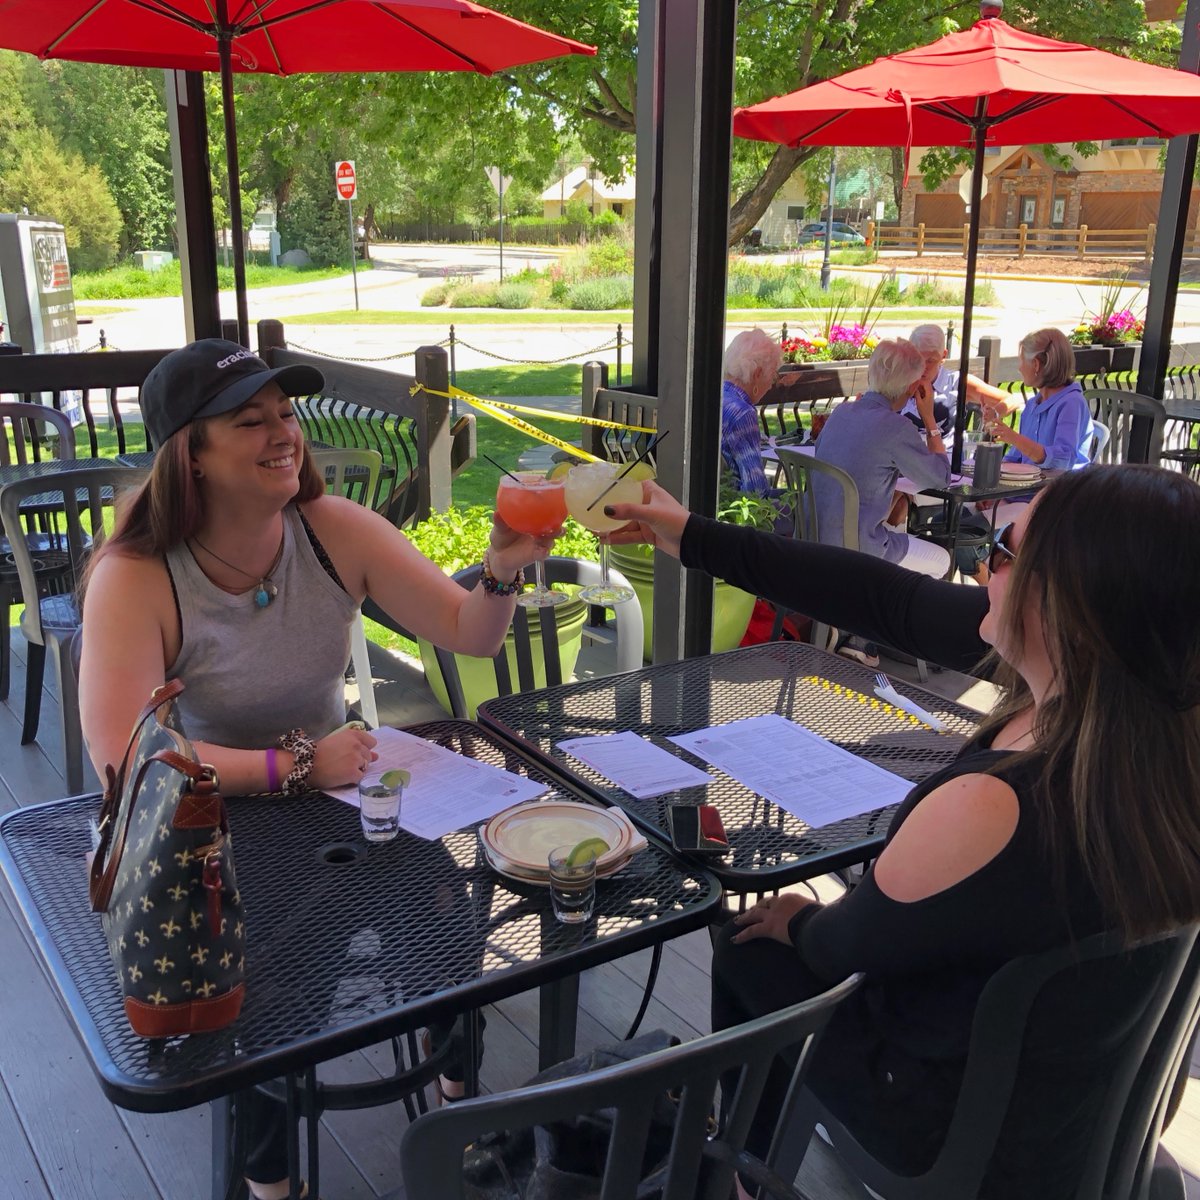 Lunchtime just got an upgrade! Our patio's in 'pre-season' mode and open for lunch only right now (as weather permits). If the sun's out, the tables will be out! ☀️

#springincolorado #lovelocal #whitehousepizza #pizza #carbondalecolorado #colorado #roaringforkvalley